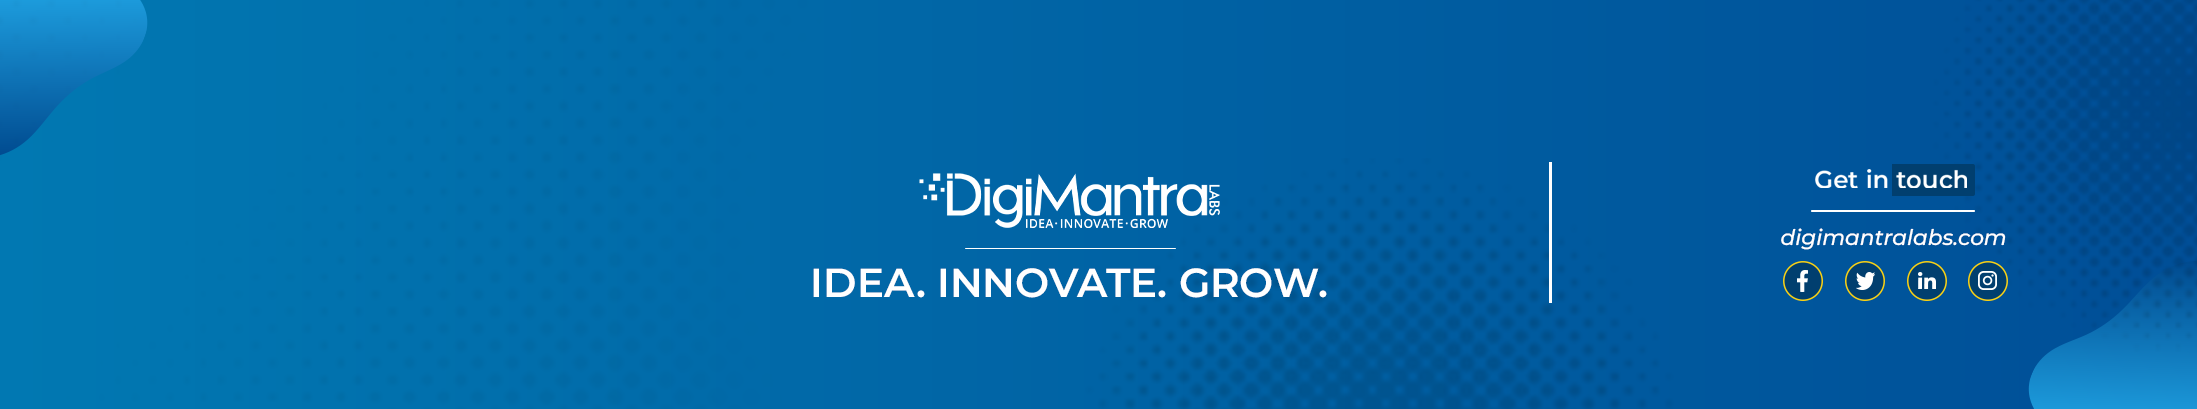 DigiMantra Labs's profile banner